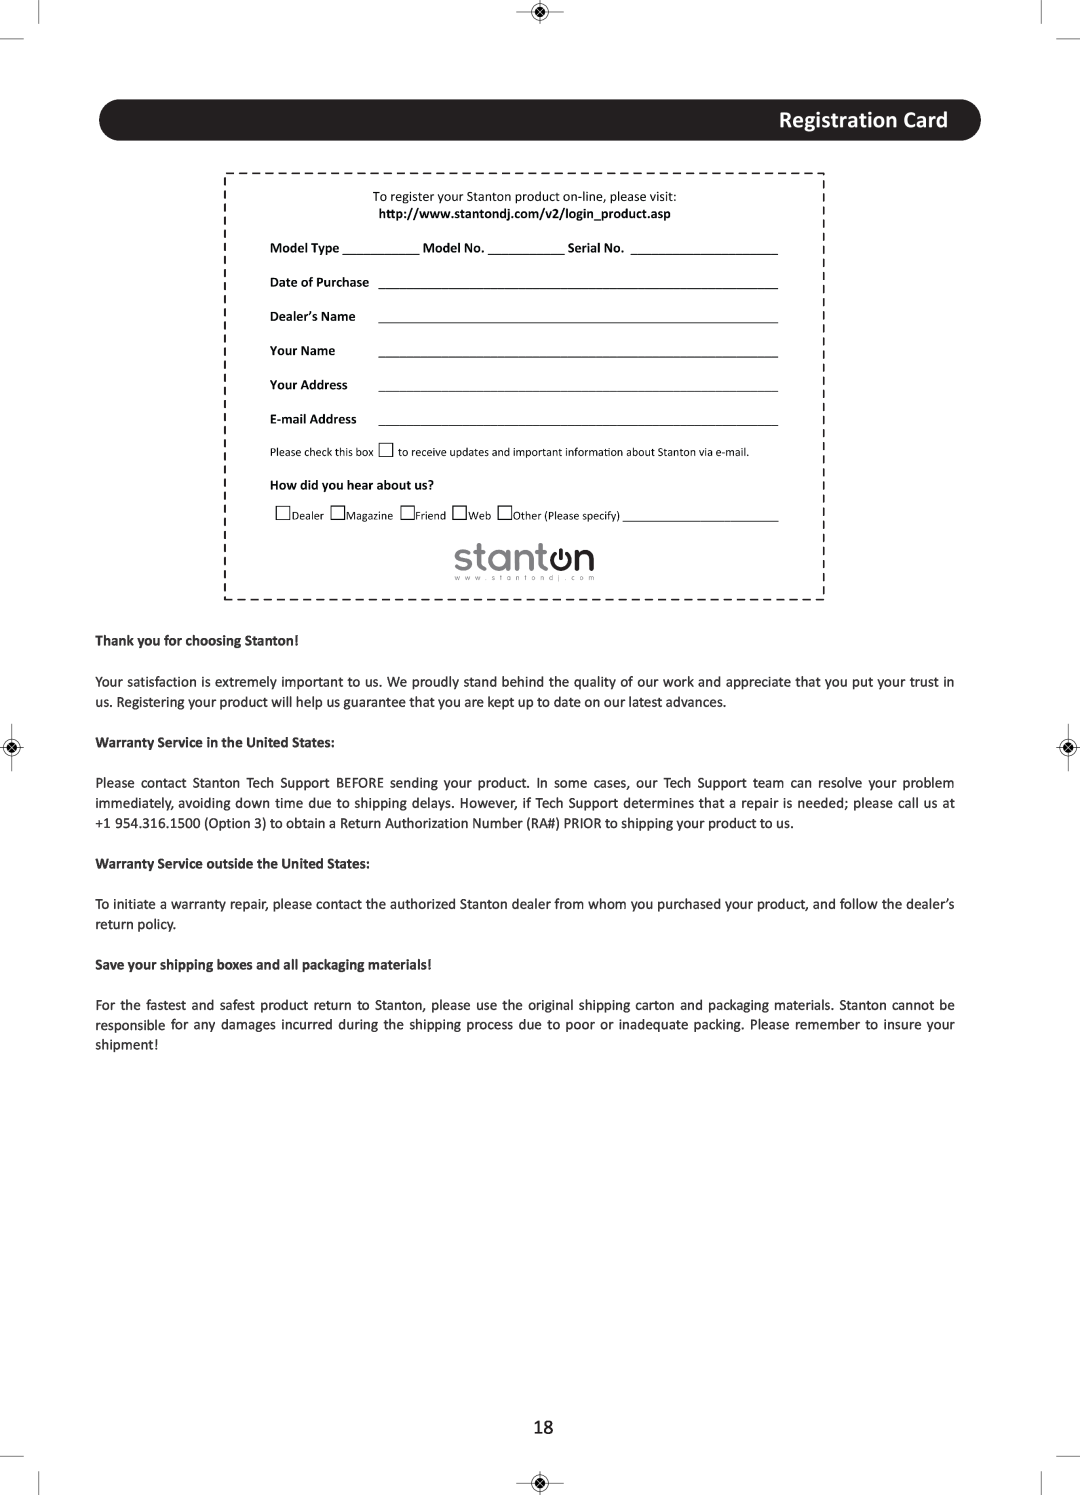 Stanton CMP.800 user manual Registration Card, Thank you for choosing Stanton, Warranty Service in the United States 